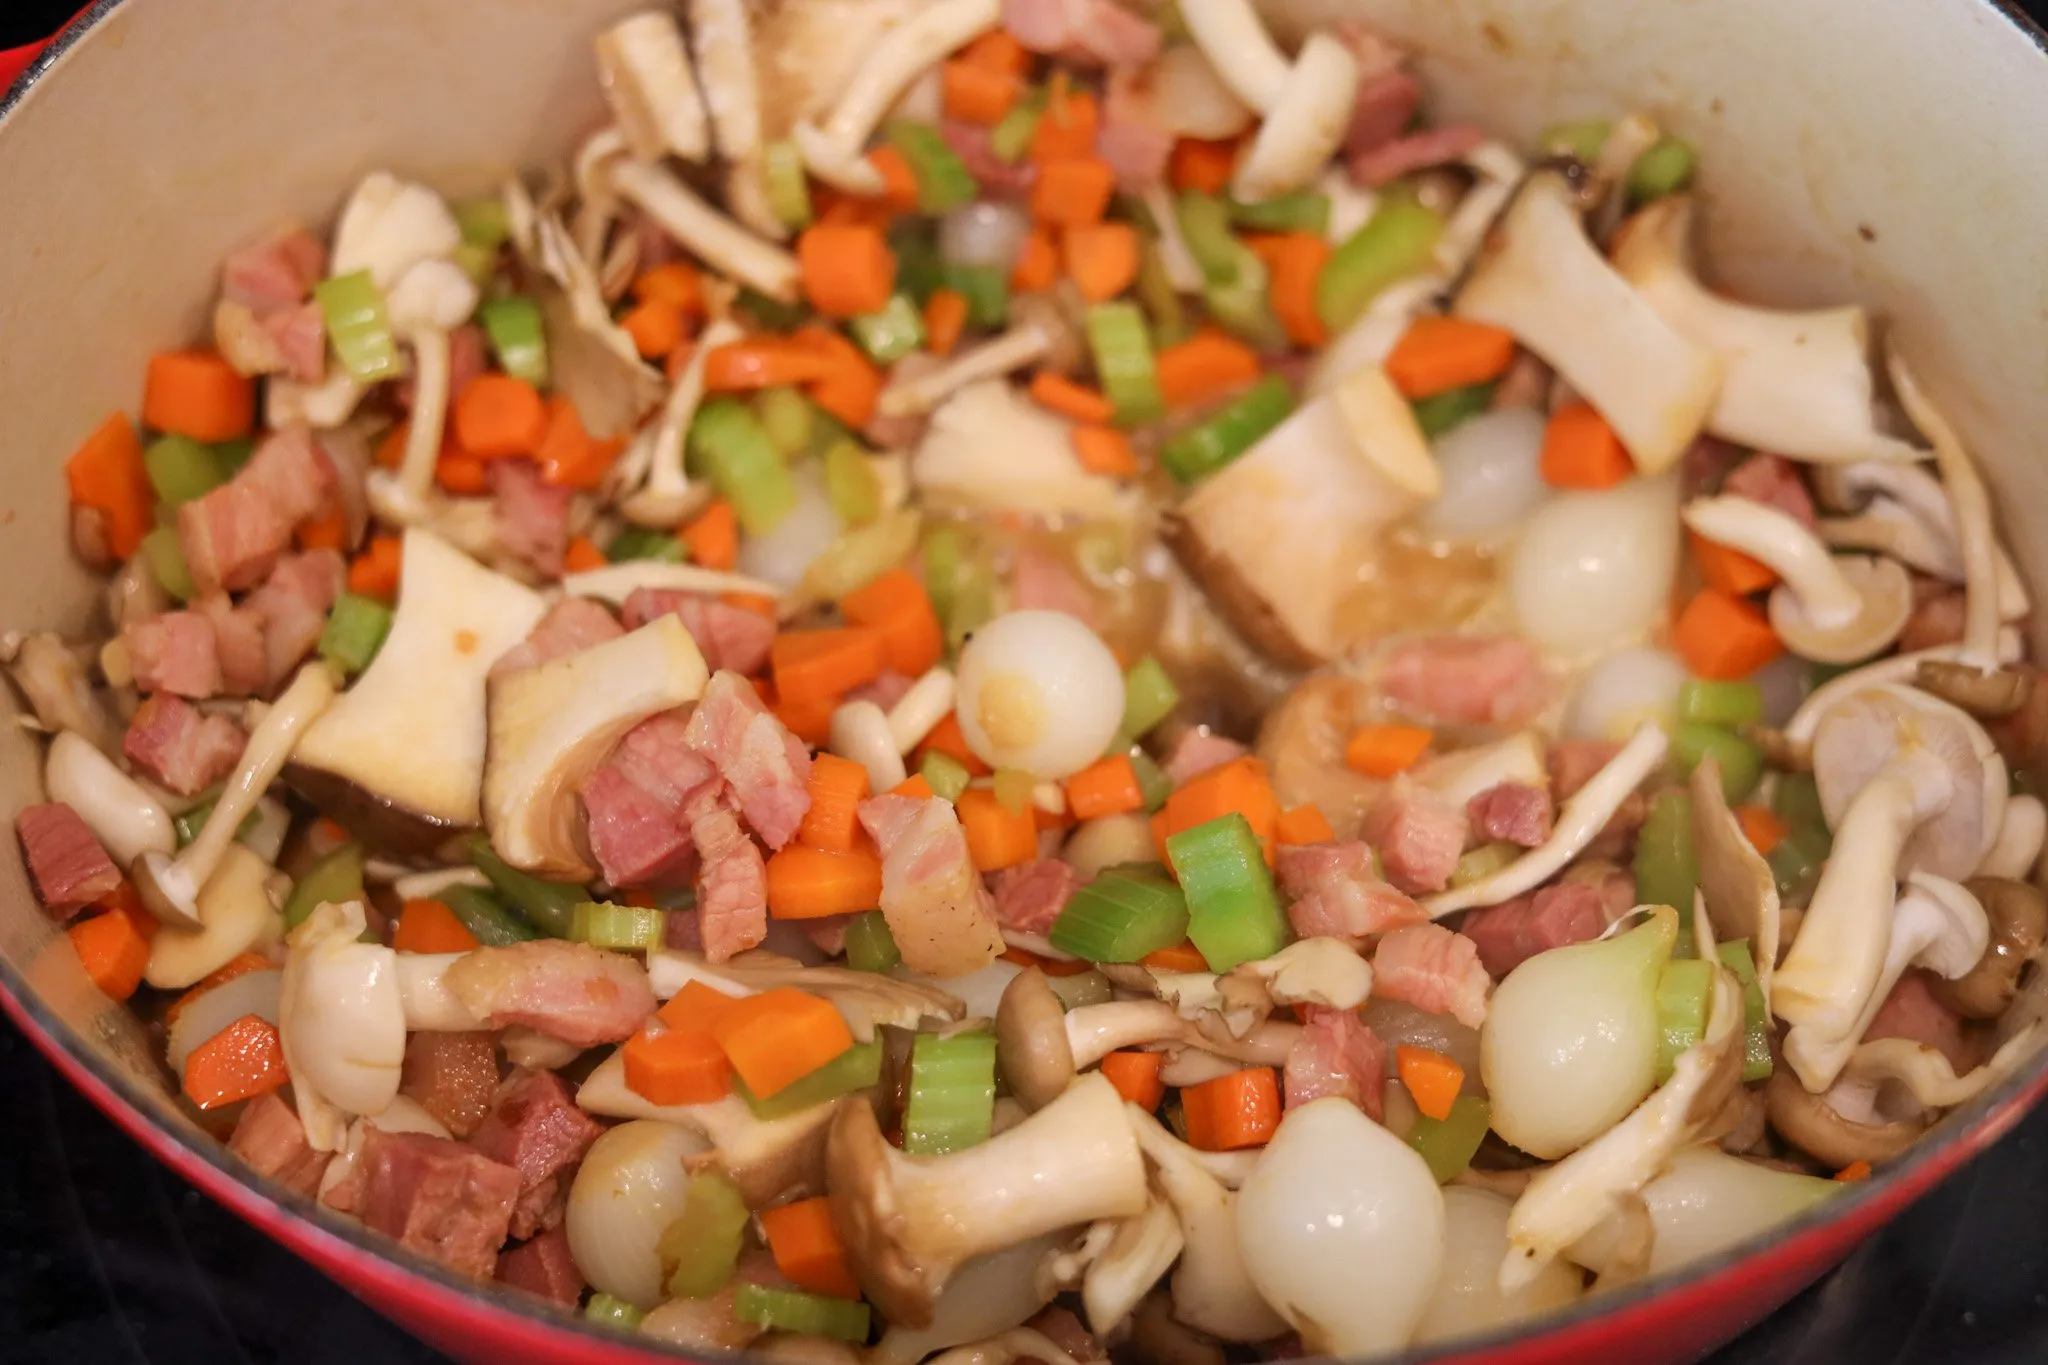 Sauteed Ingredients for coq au vin blanc - chicken, white wine, pork belly, celery, onions, mushrooms, parsley